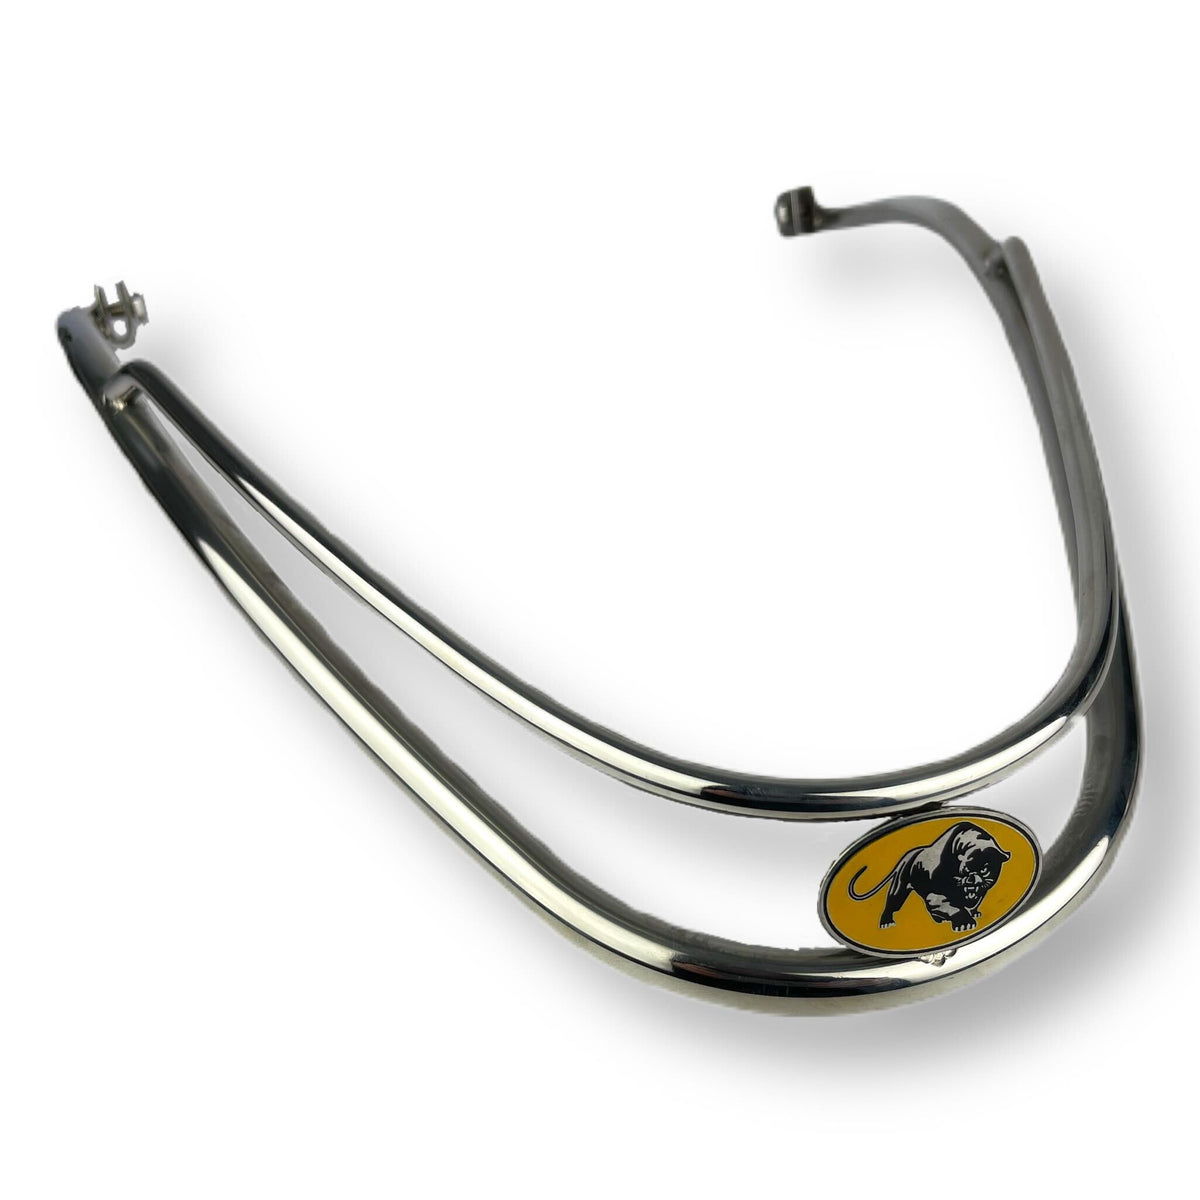 Scomadi TL TT 125-200 Front Bumper Bar Curved Trim Panther Badge - Polished Stainless Steel